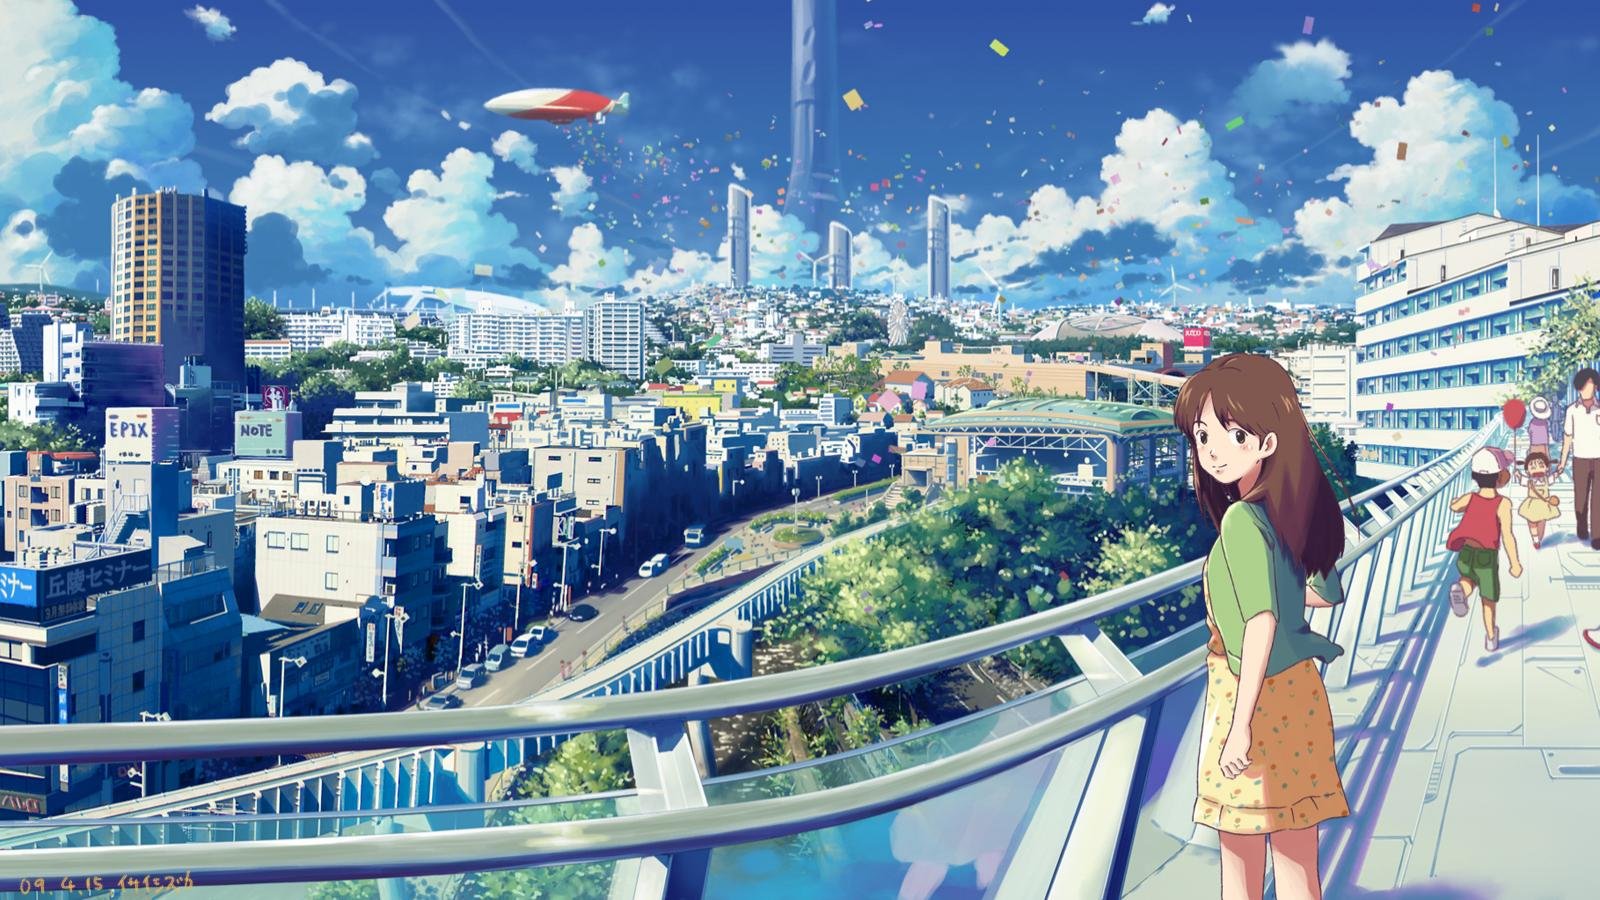 Download hd 1600x900 Anime city computer wallpaper ID:118694 for free